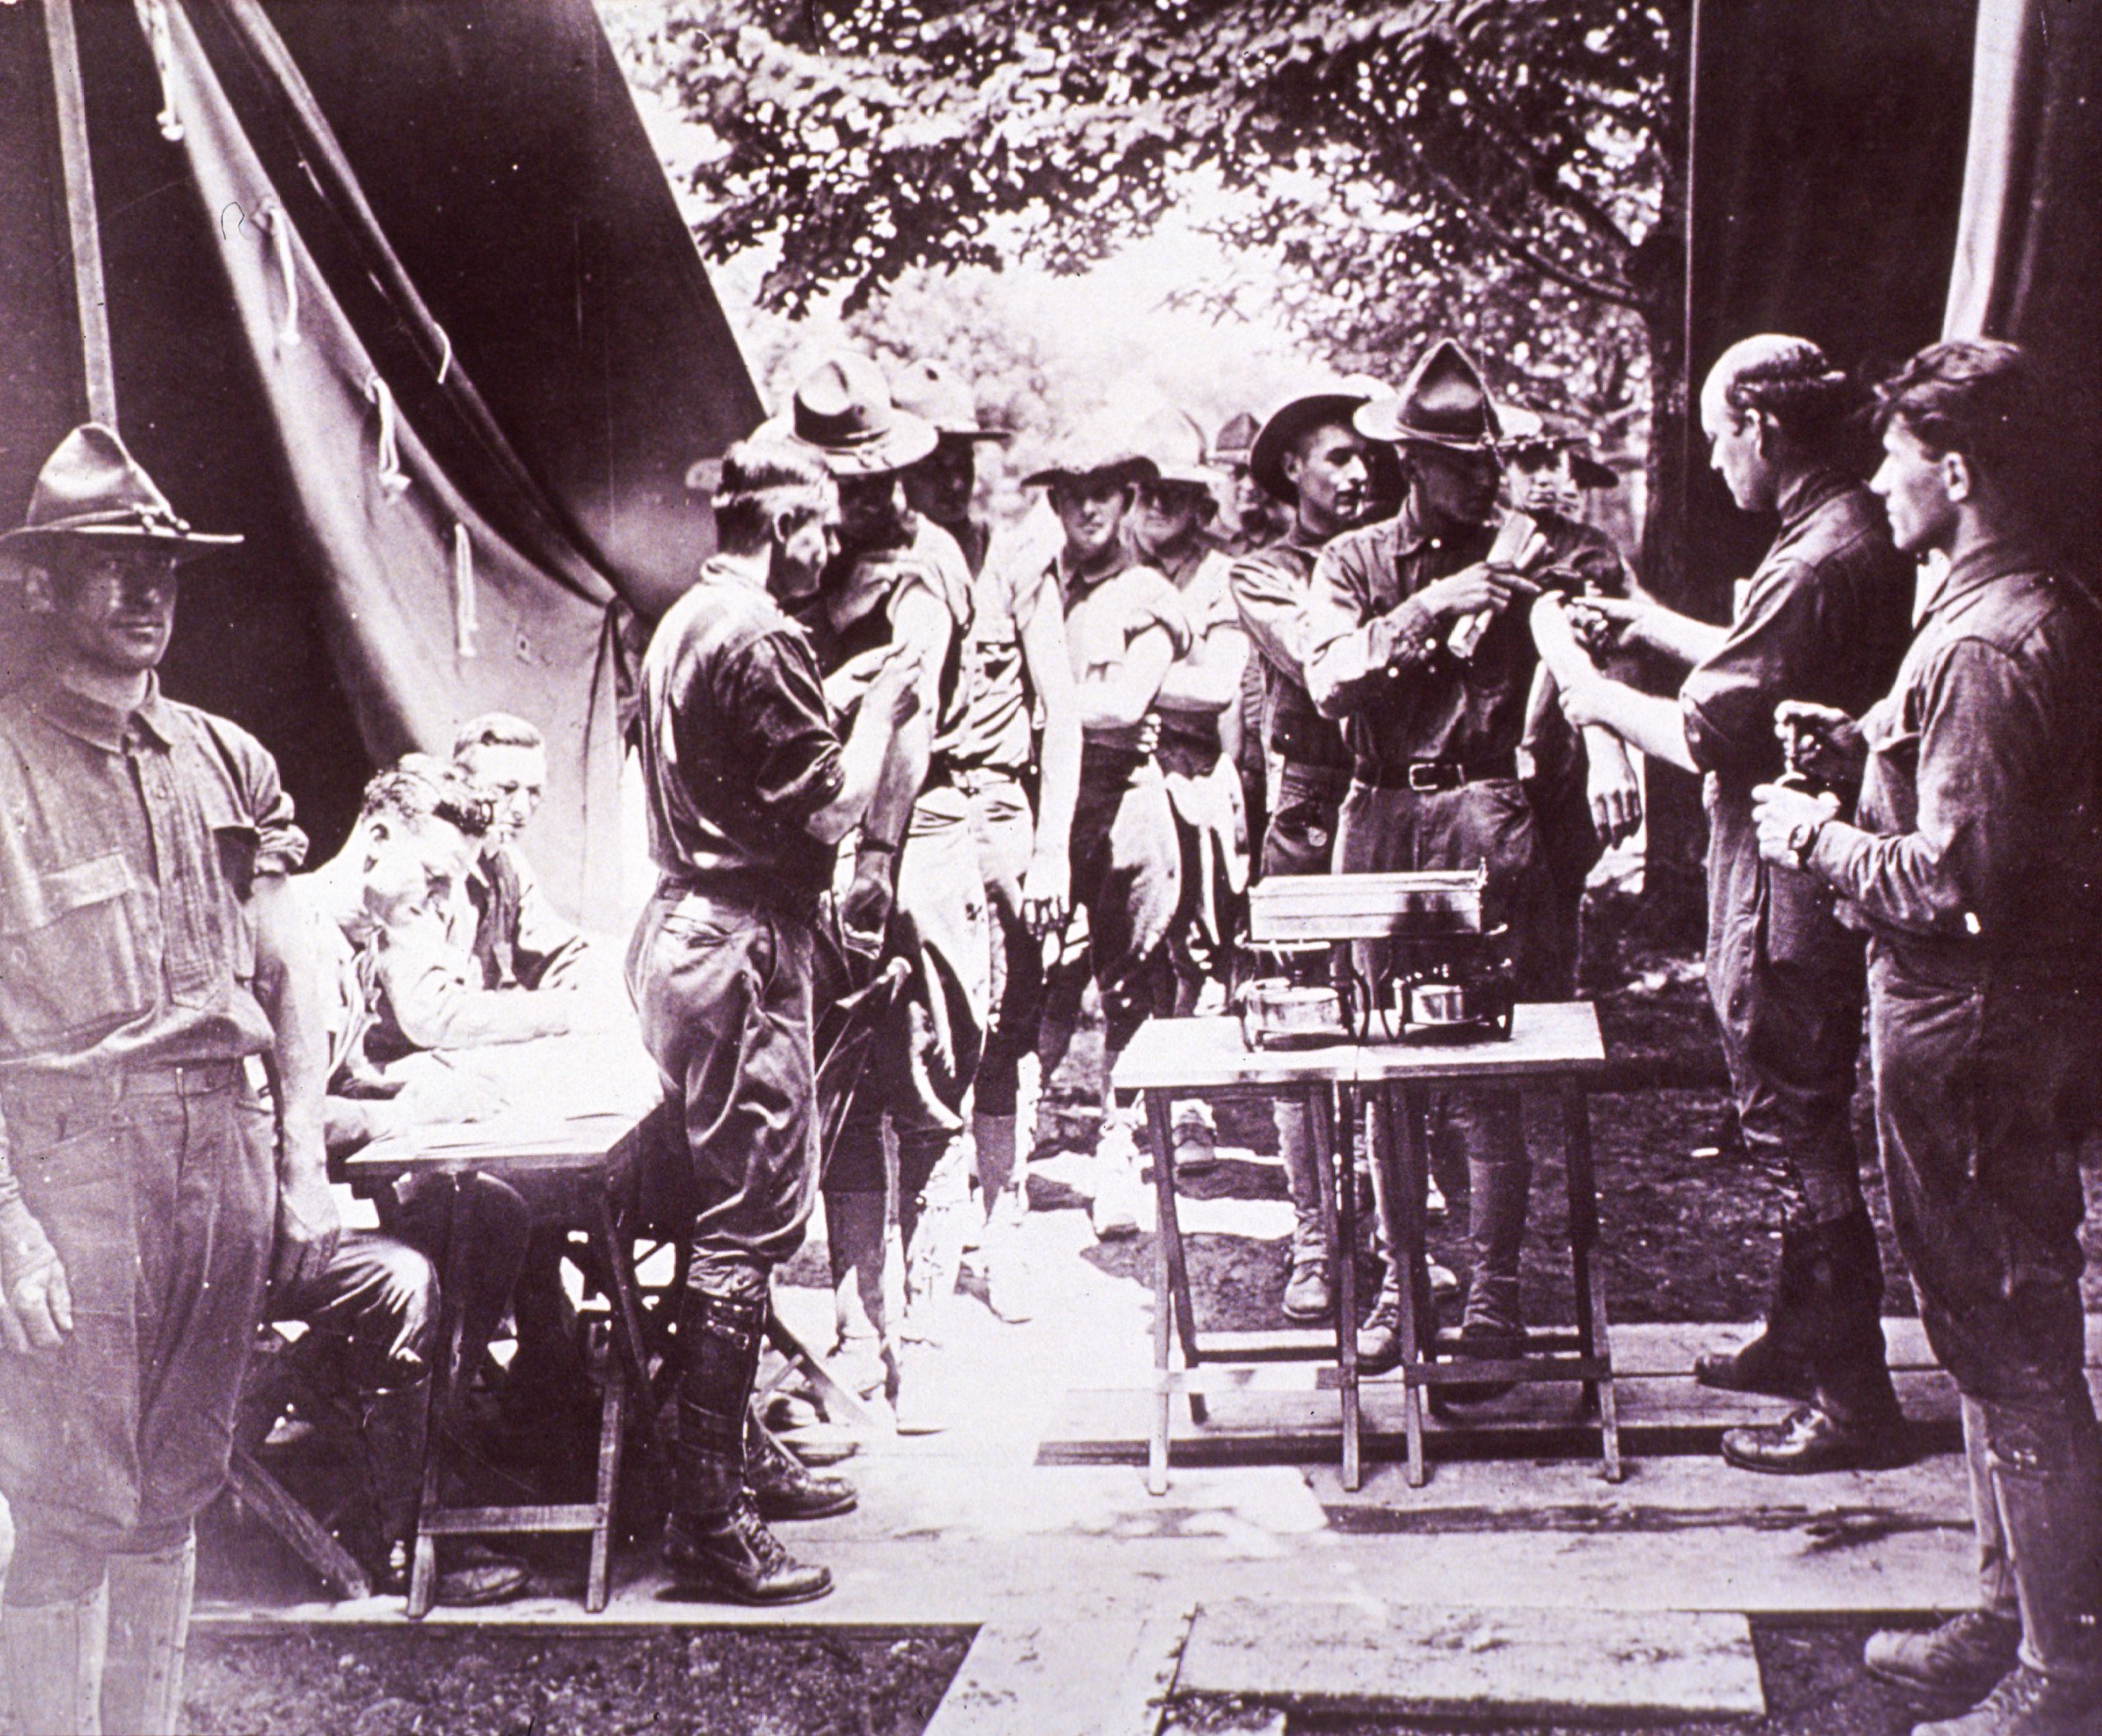 Black and white photograph of soldiers standing in two lines as the get vaccinated outdoors between two large tents and wood planks laid down as a walkway during World War I